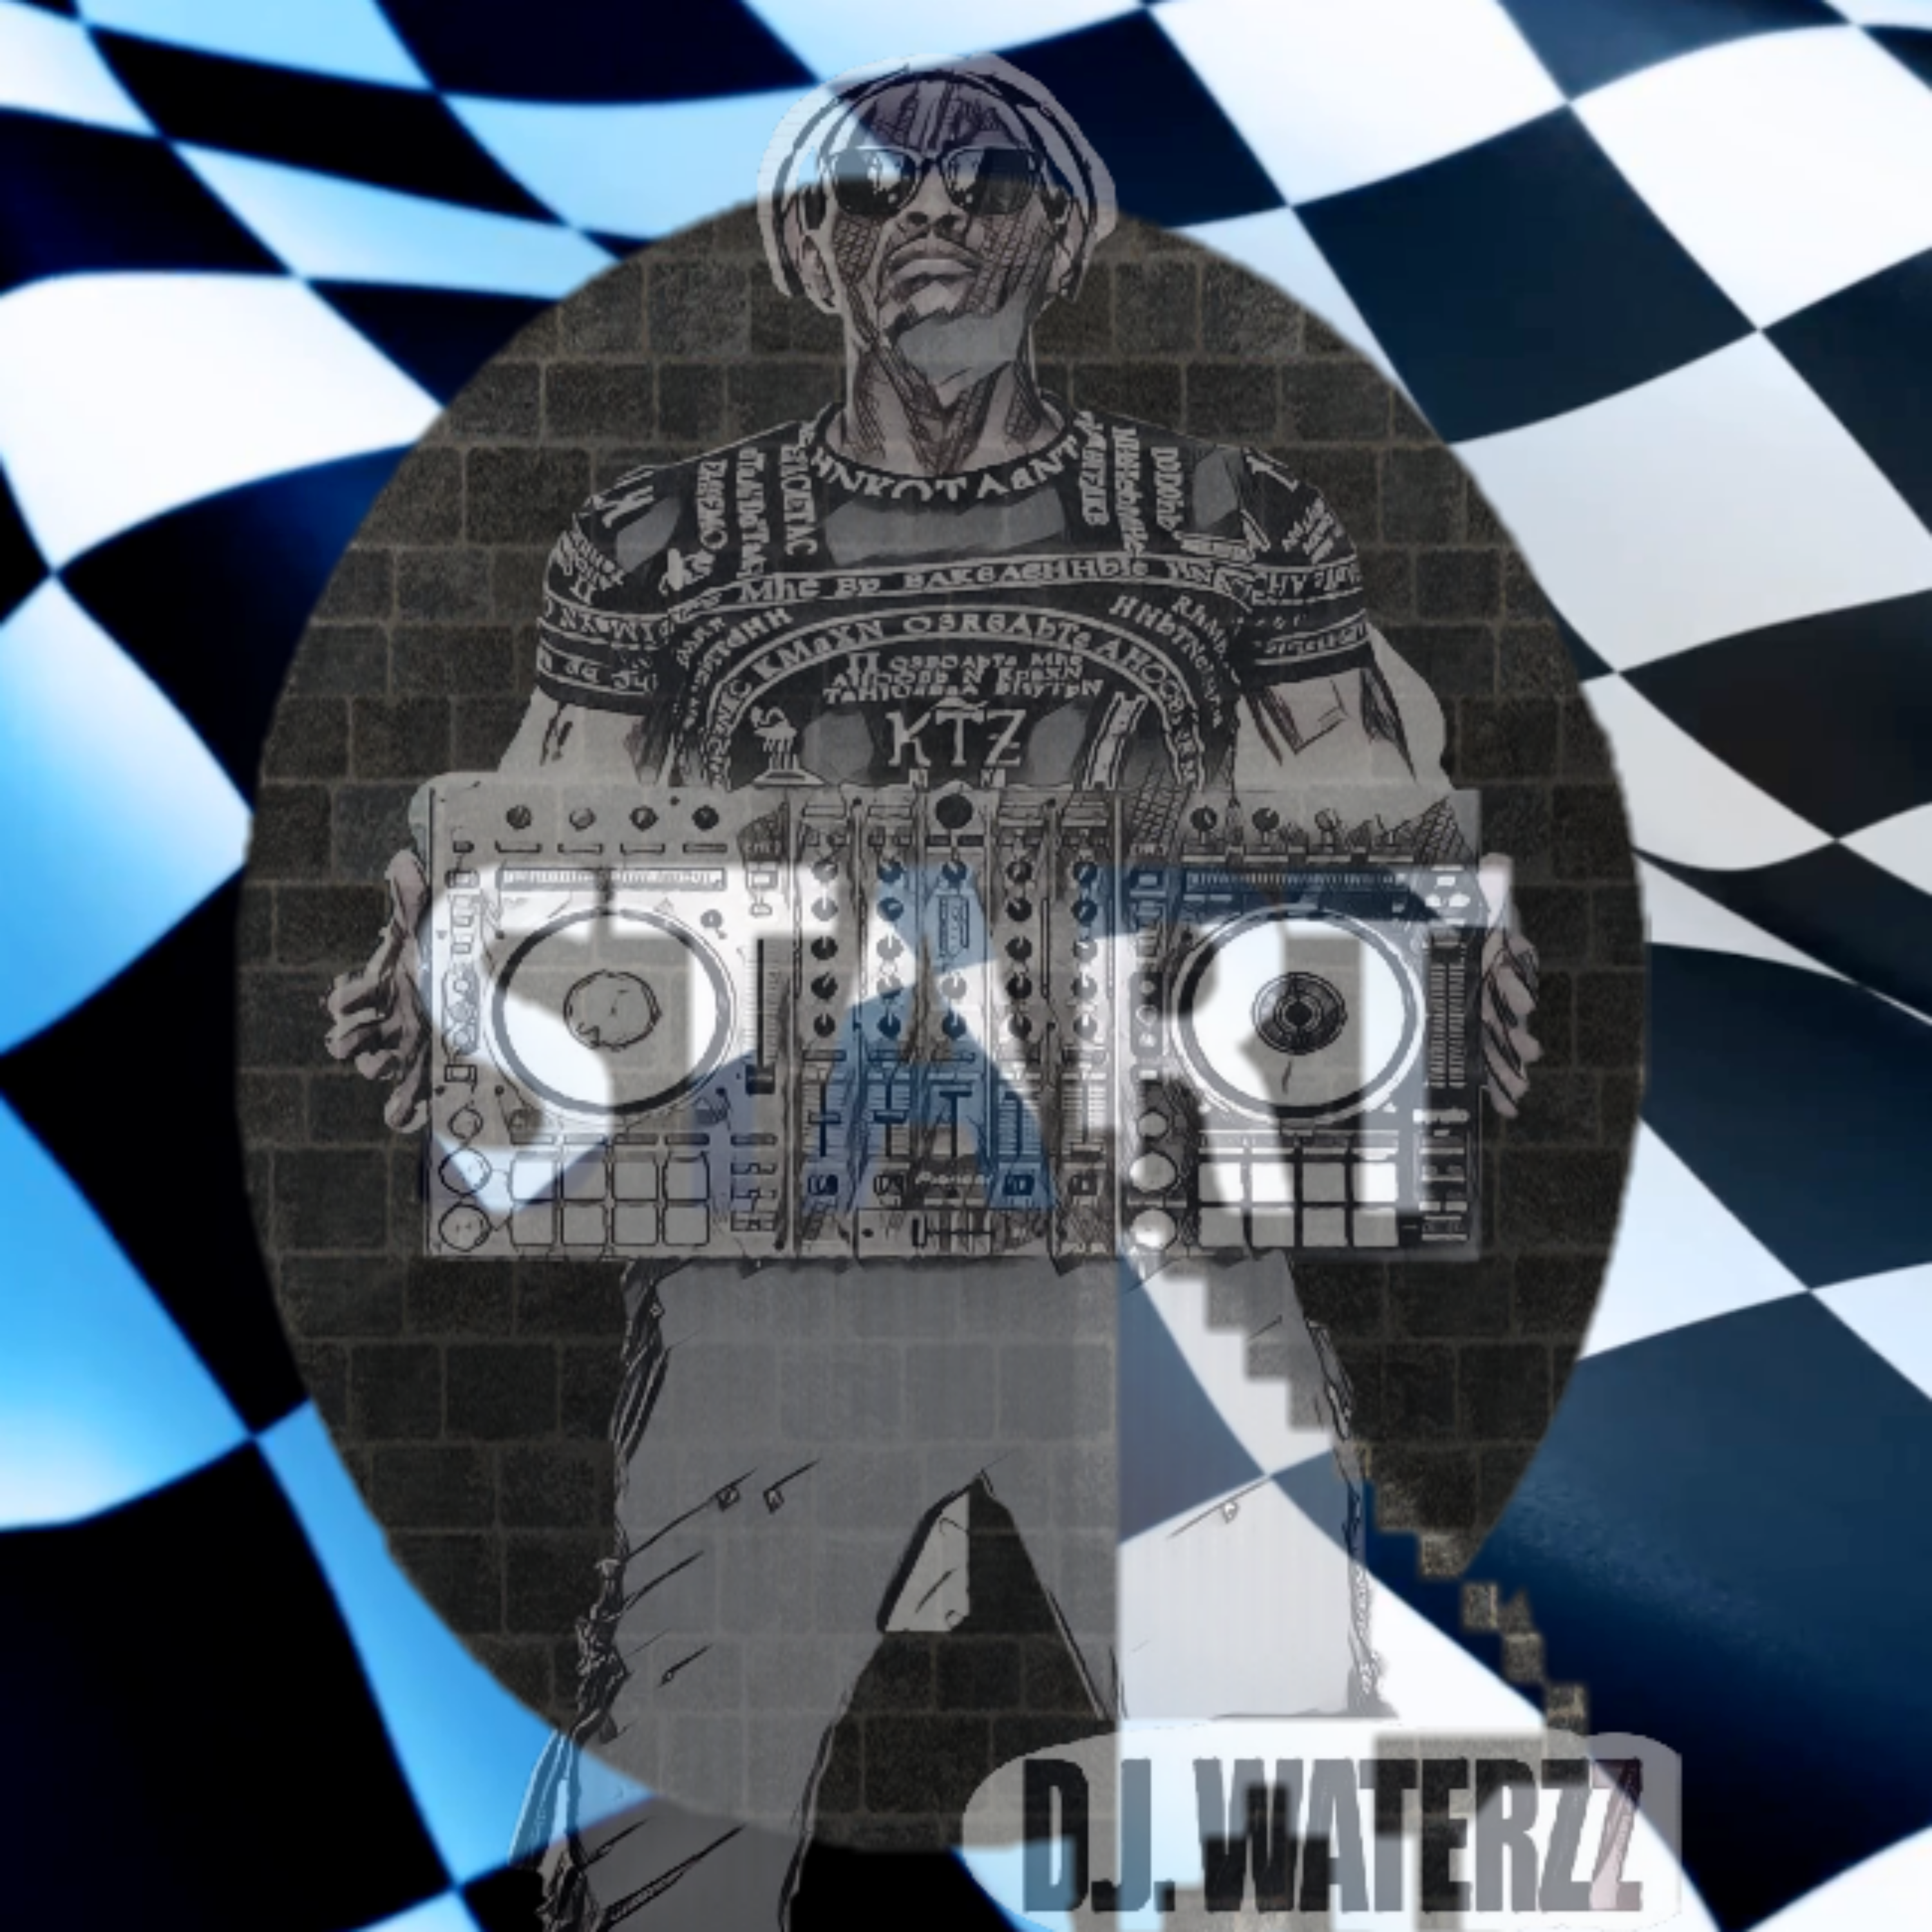 DJ Waterzz Holds All Of His Competition Hostage In His Gritty New Track Called “Start (SMG).”